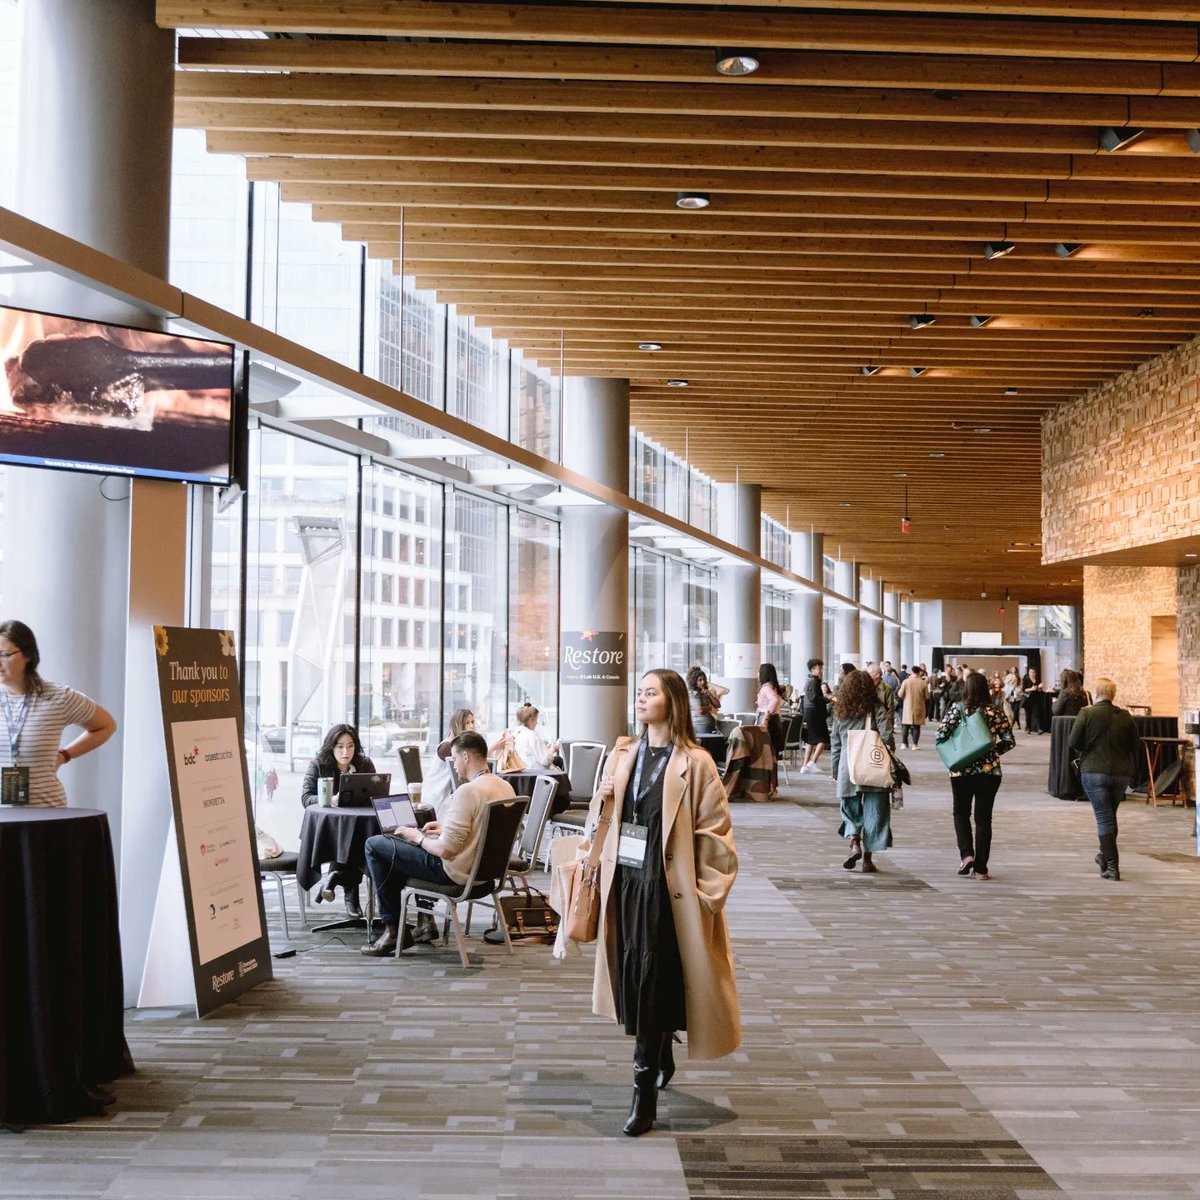 Day 3 at #ChampionsRetreat2024 was a day of #mindfulness, #restoration, and community building. At @VanConventions, delegates were inspired by talks covering the importance of #Wellbeing and the role of businesses in promoting sustainability. #WellnessInBusiness #restore